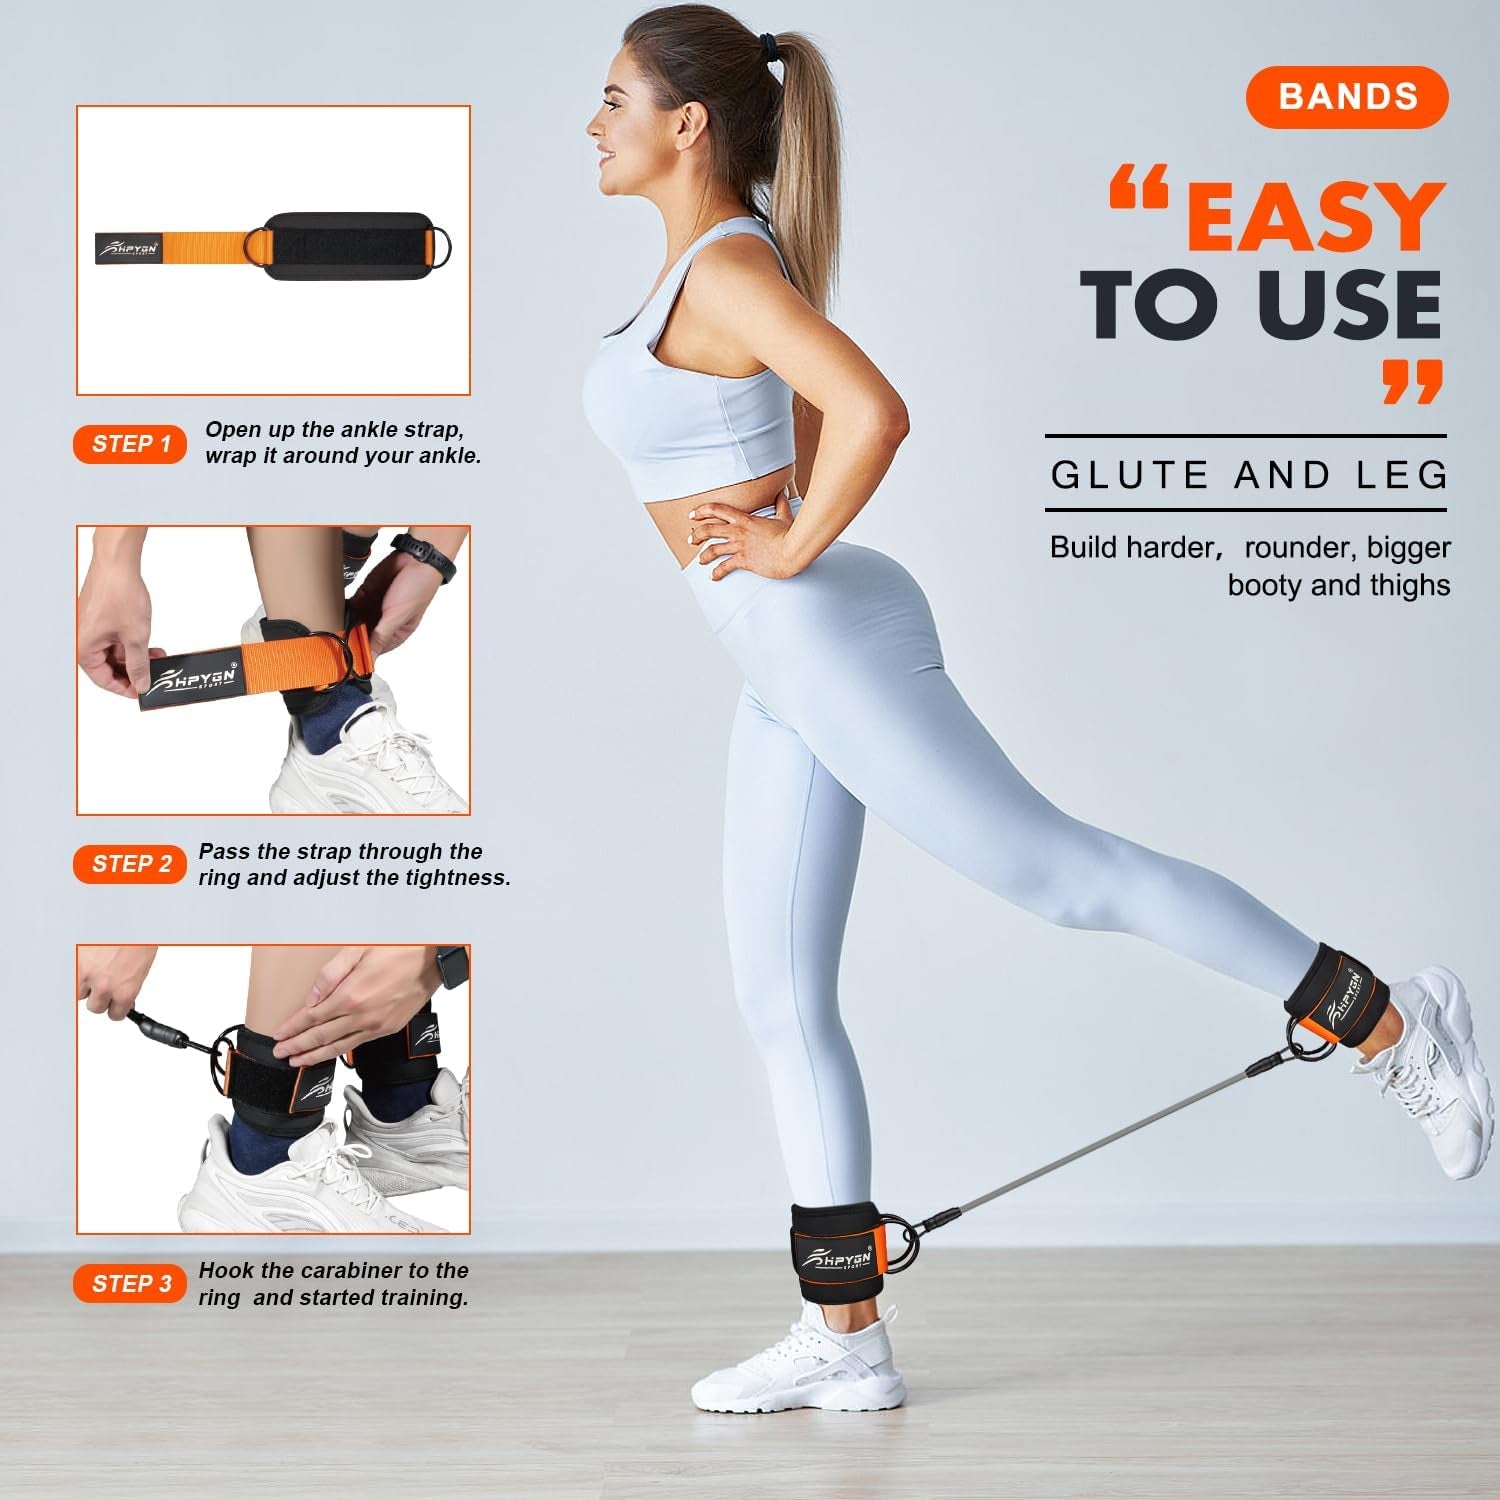 Ankle Resistance Bands, Ankle Bands for Working Out with Cuffs, Resistance Bands for Leg Butt Training Workout Equipment for Kickbacks Hip Gluteus Training Exercises, Ankle Strap with Exercise Bands